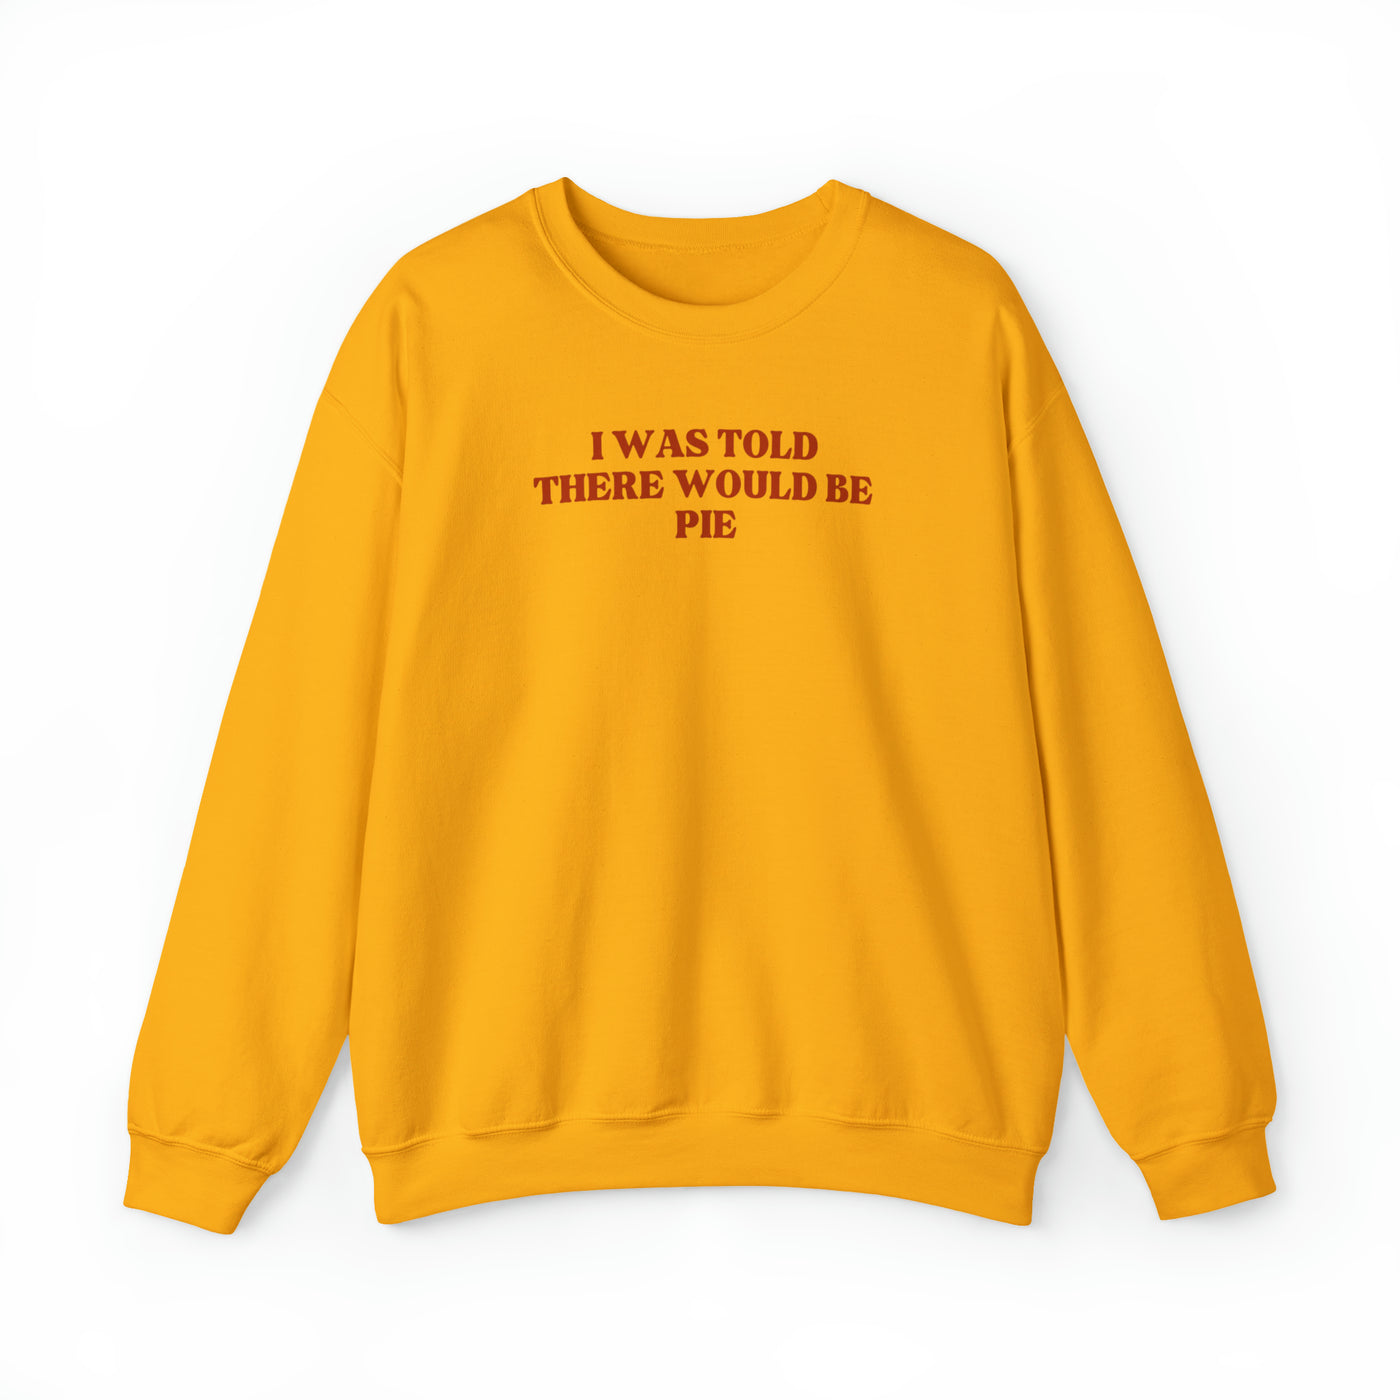 I Was Told There Would Be Pie Crewneck Sweatshirt